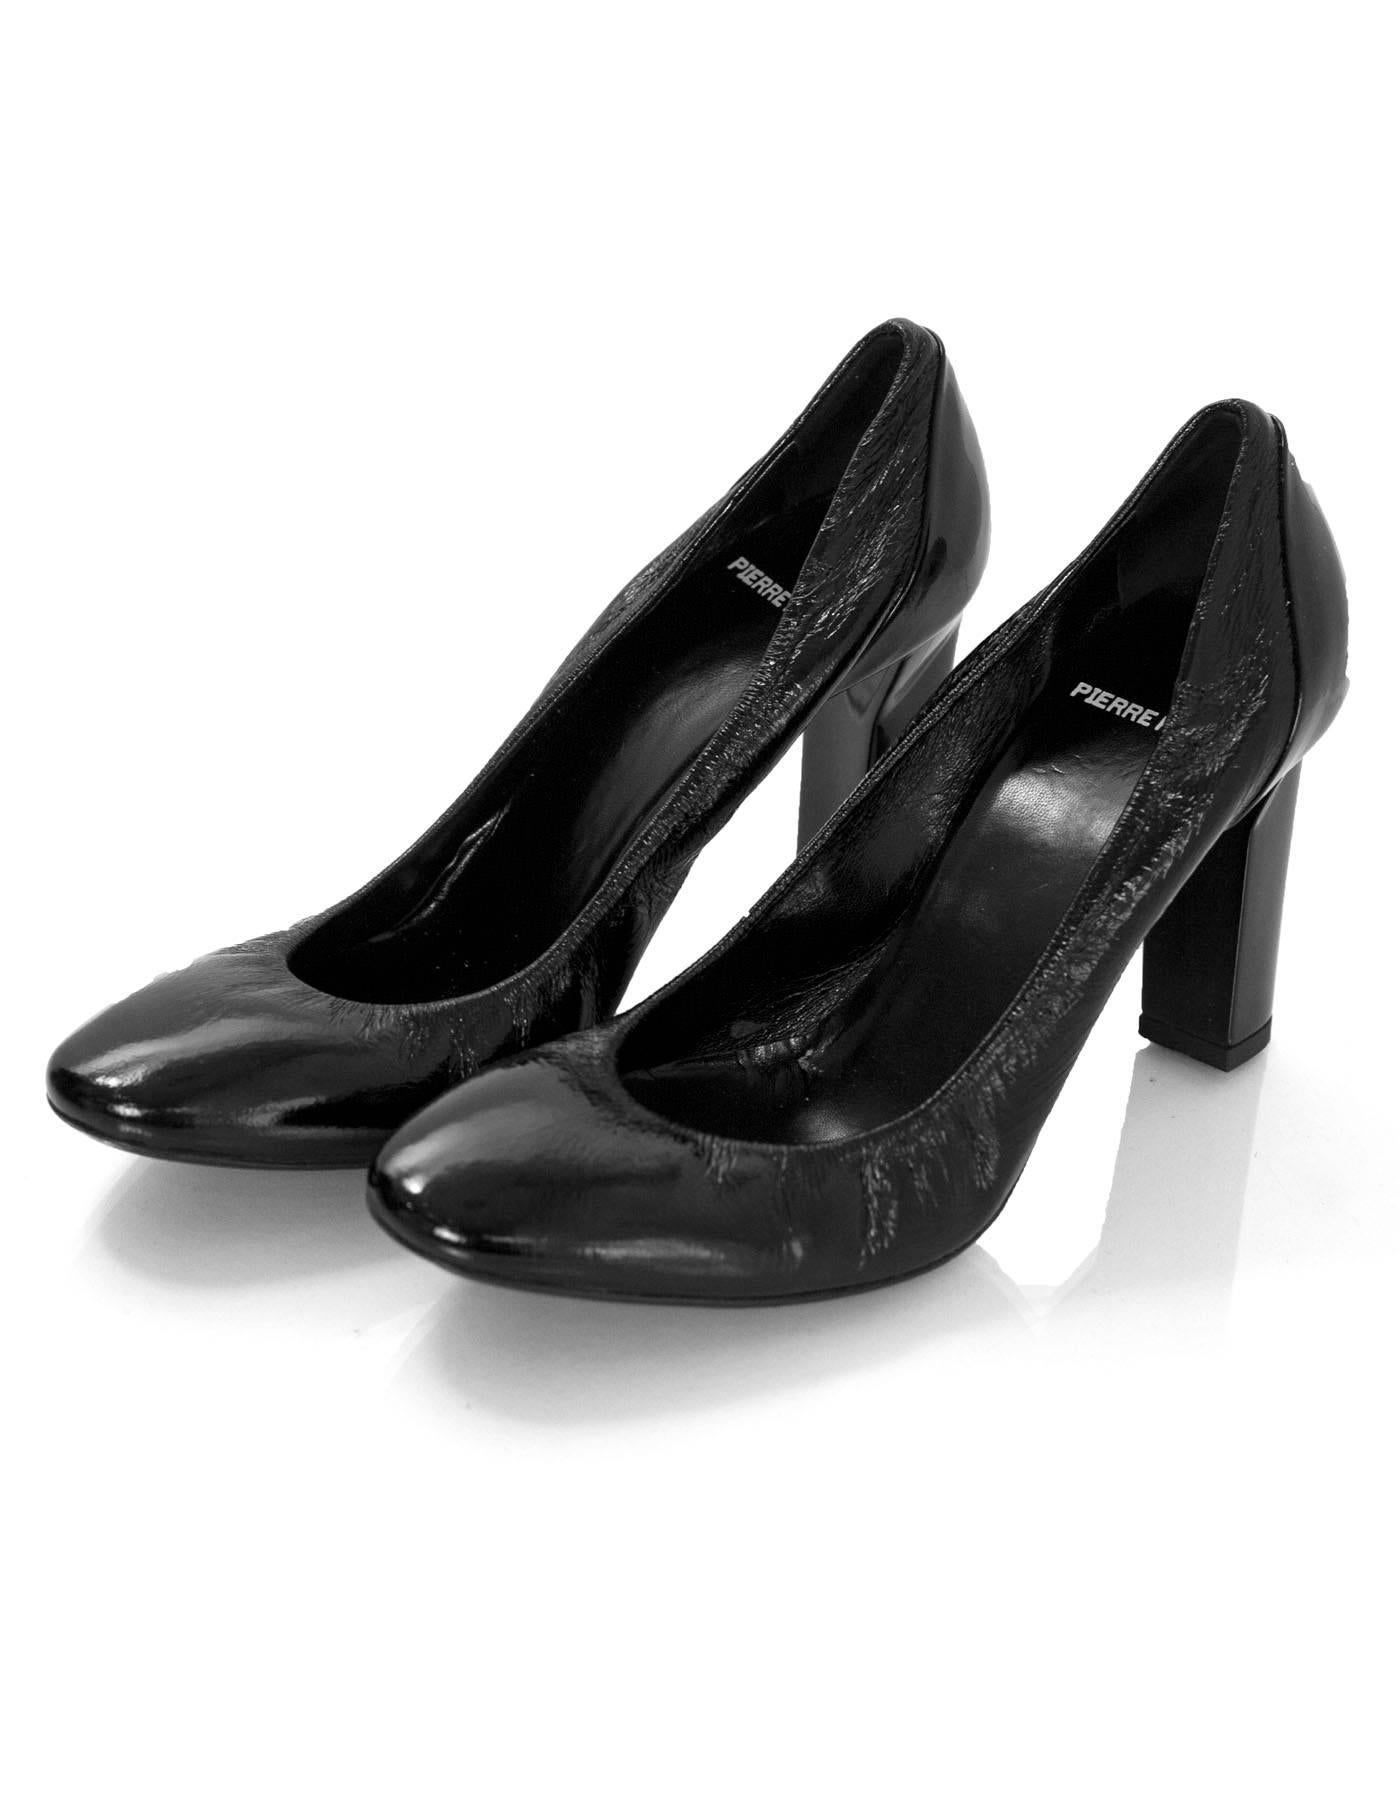 Pierre Hardy Black Patent Leather Pumps Sz 37.5

Made In: Italy
Color: Black
Materials: Patent leather
Closure/Opening: Slide on
Sole Stamp: Pierre Hardy Made in Italy 37.5
Overall Condition: Excellent pre-owned condition, light wear at